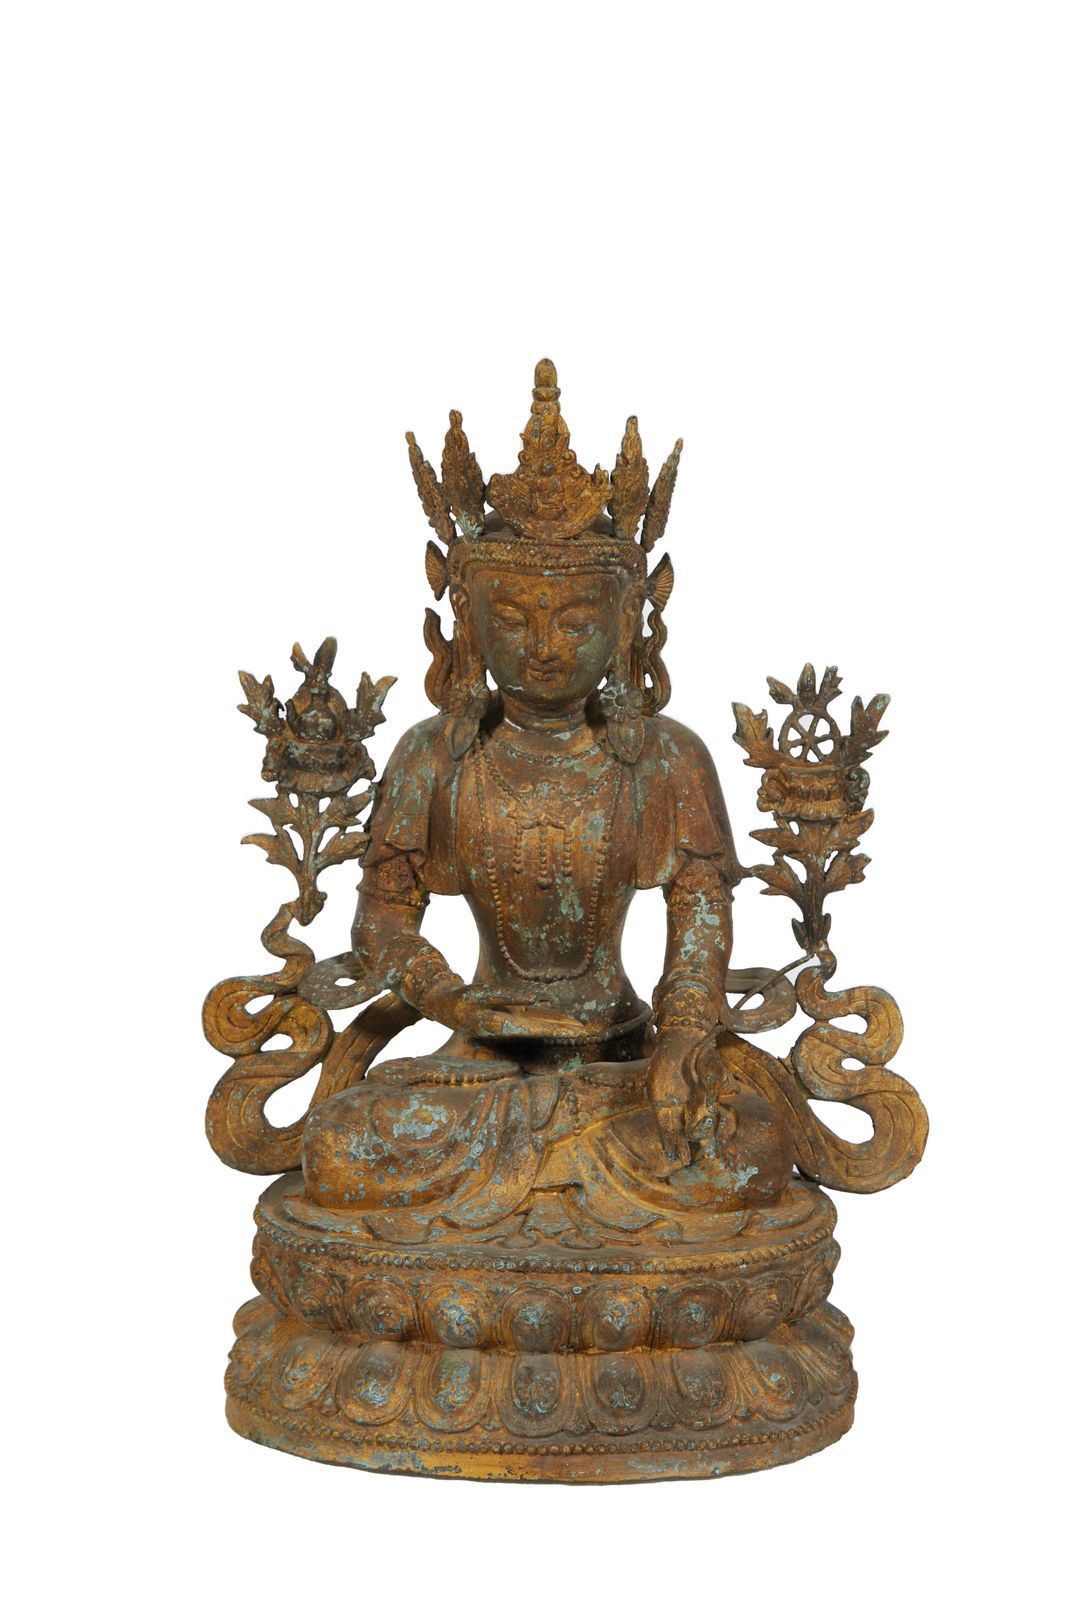 Null 58 Guanyin in chased and gilded bronze
72 x 52 cm